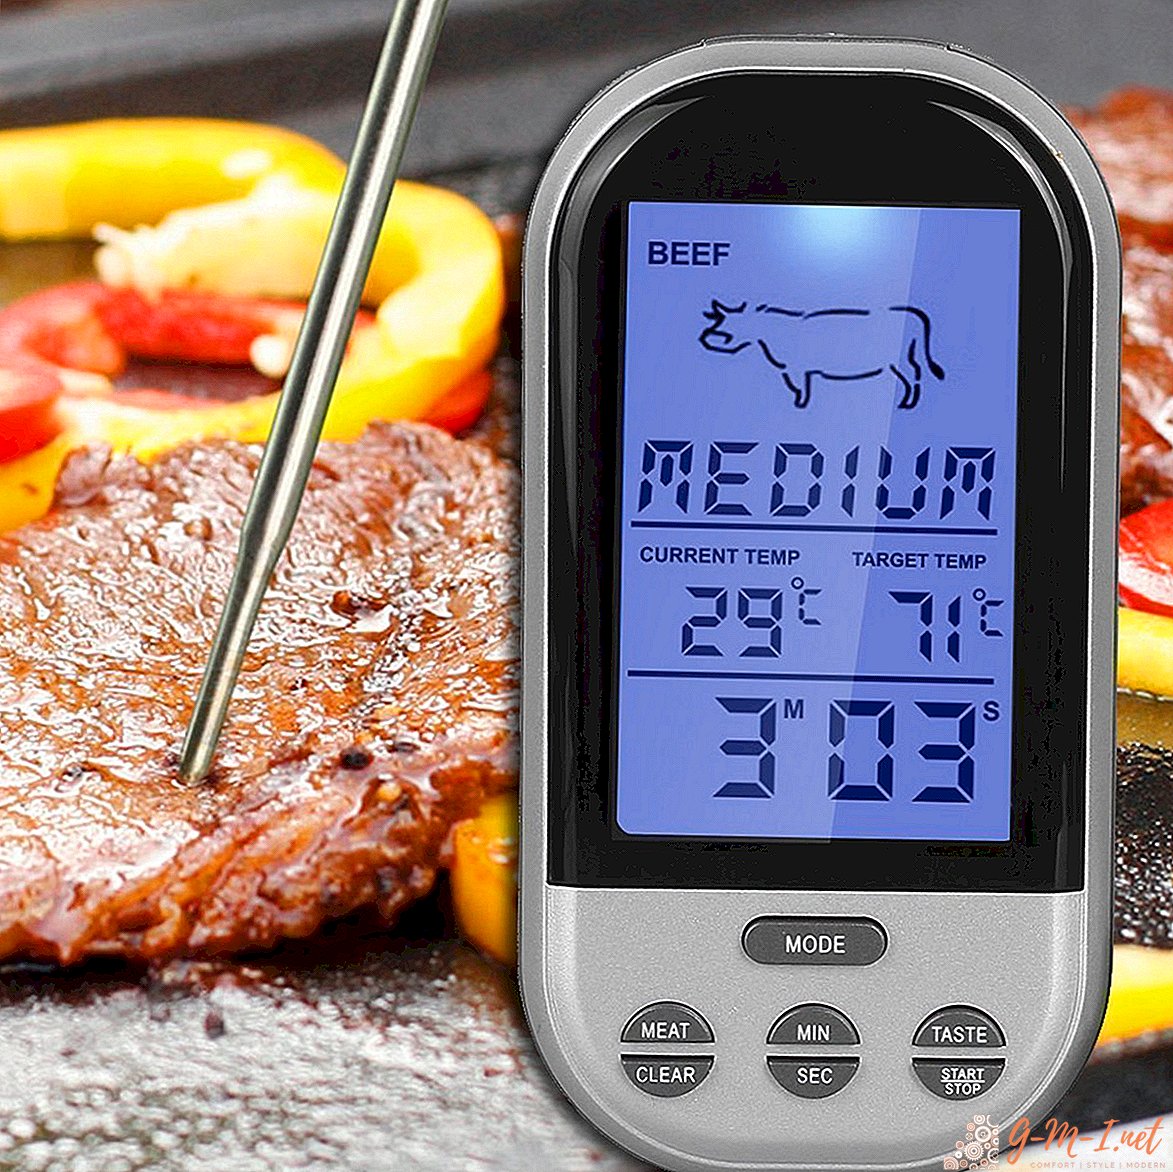 Why men will be delighted with a digital meat thermometer